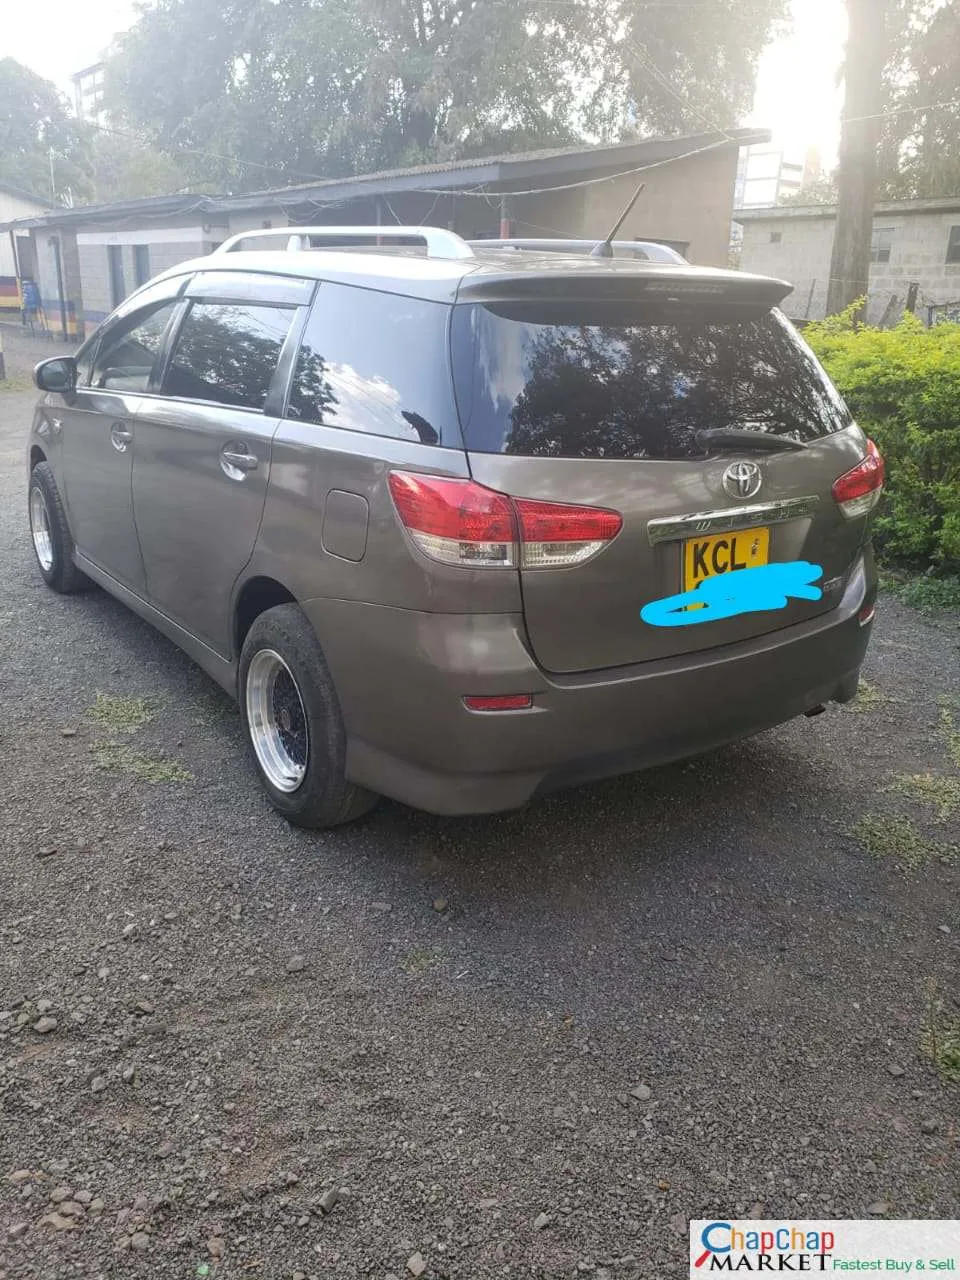 Cars Cars For Sale-Toyota WISH You Pay 30% Deposit Trade in OK Wish for sale in kenya hire purchase installments EXCLUSIVE 3